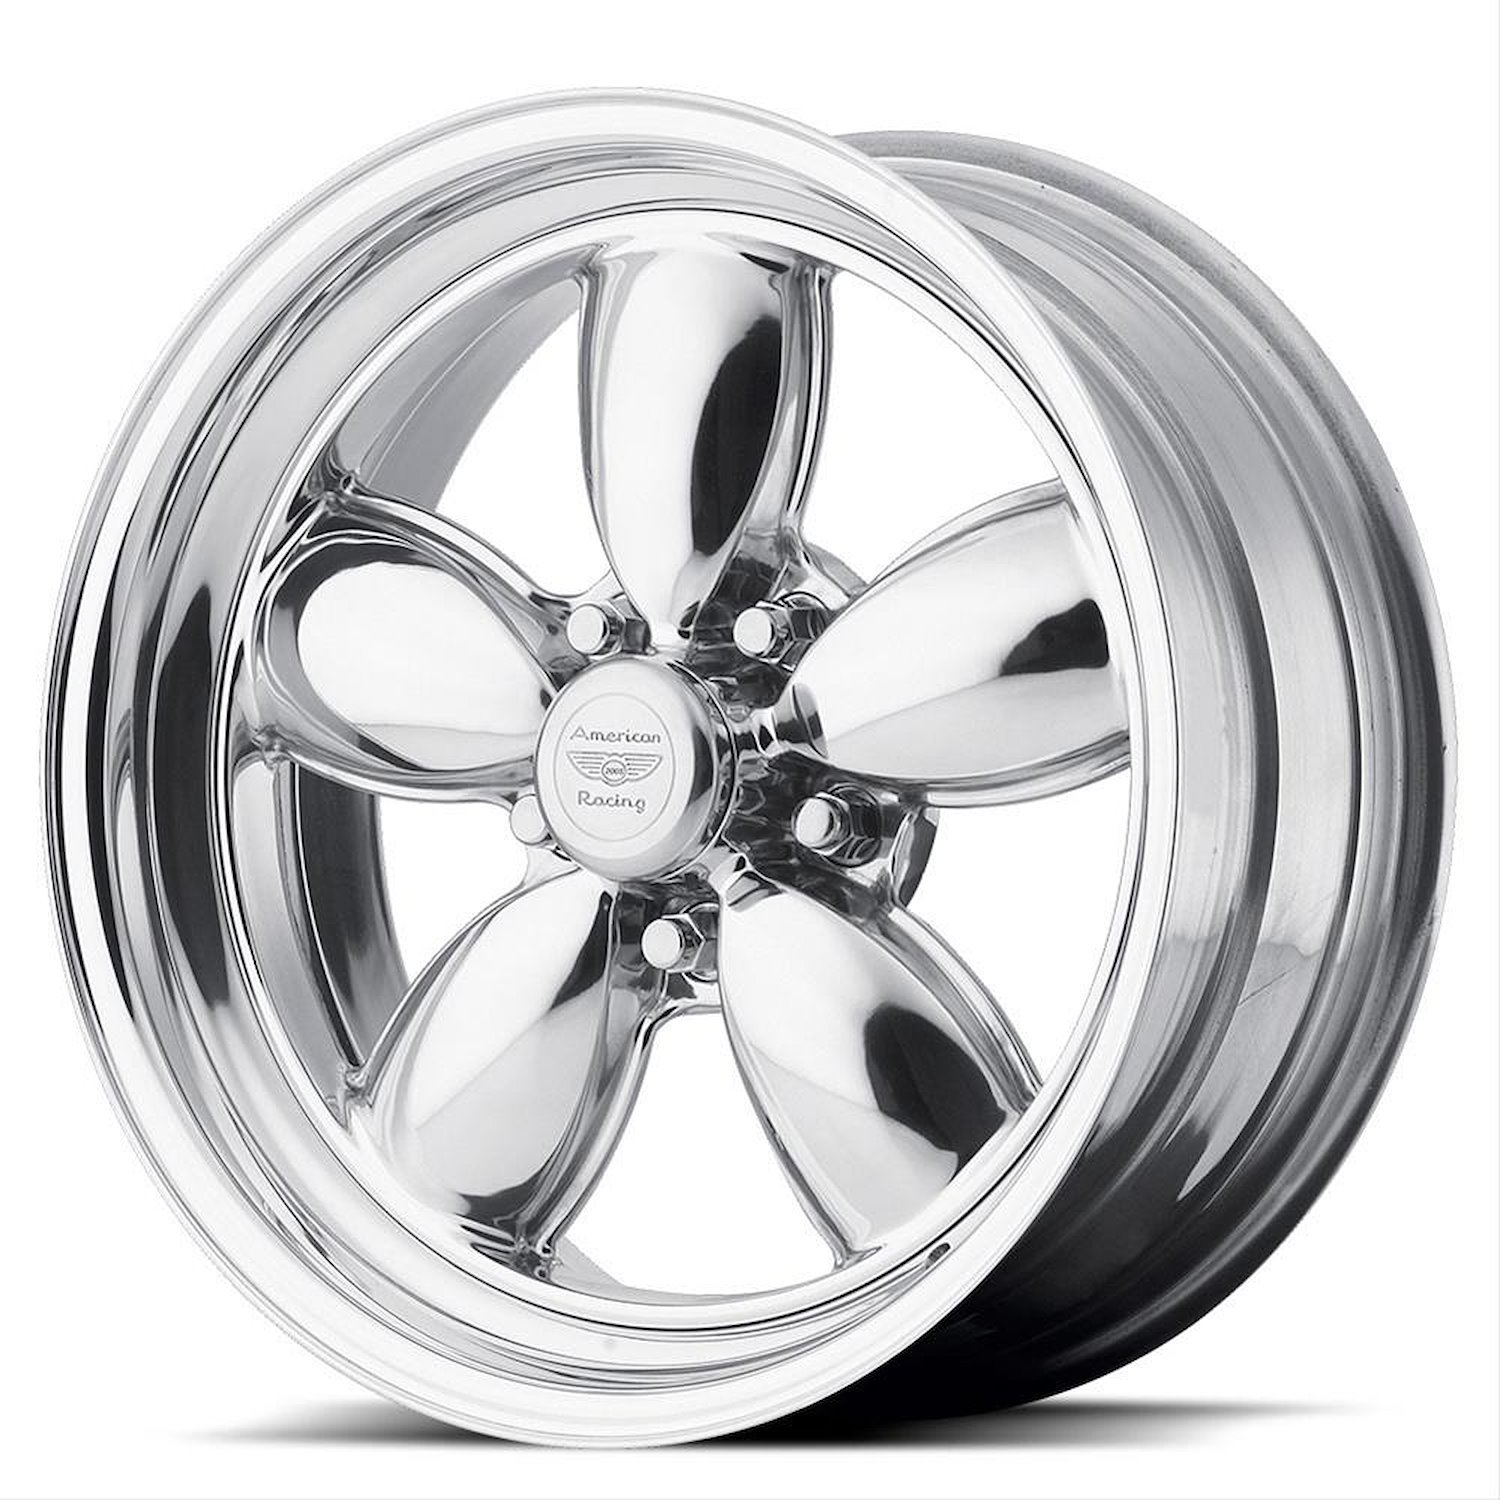 VN420 Classic 200S Wheel Size: 15" X 8" Bolt Pattern: 5X114.3 mm [Polished]